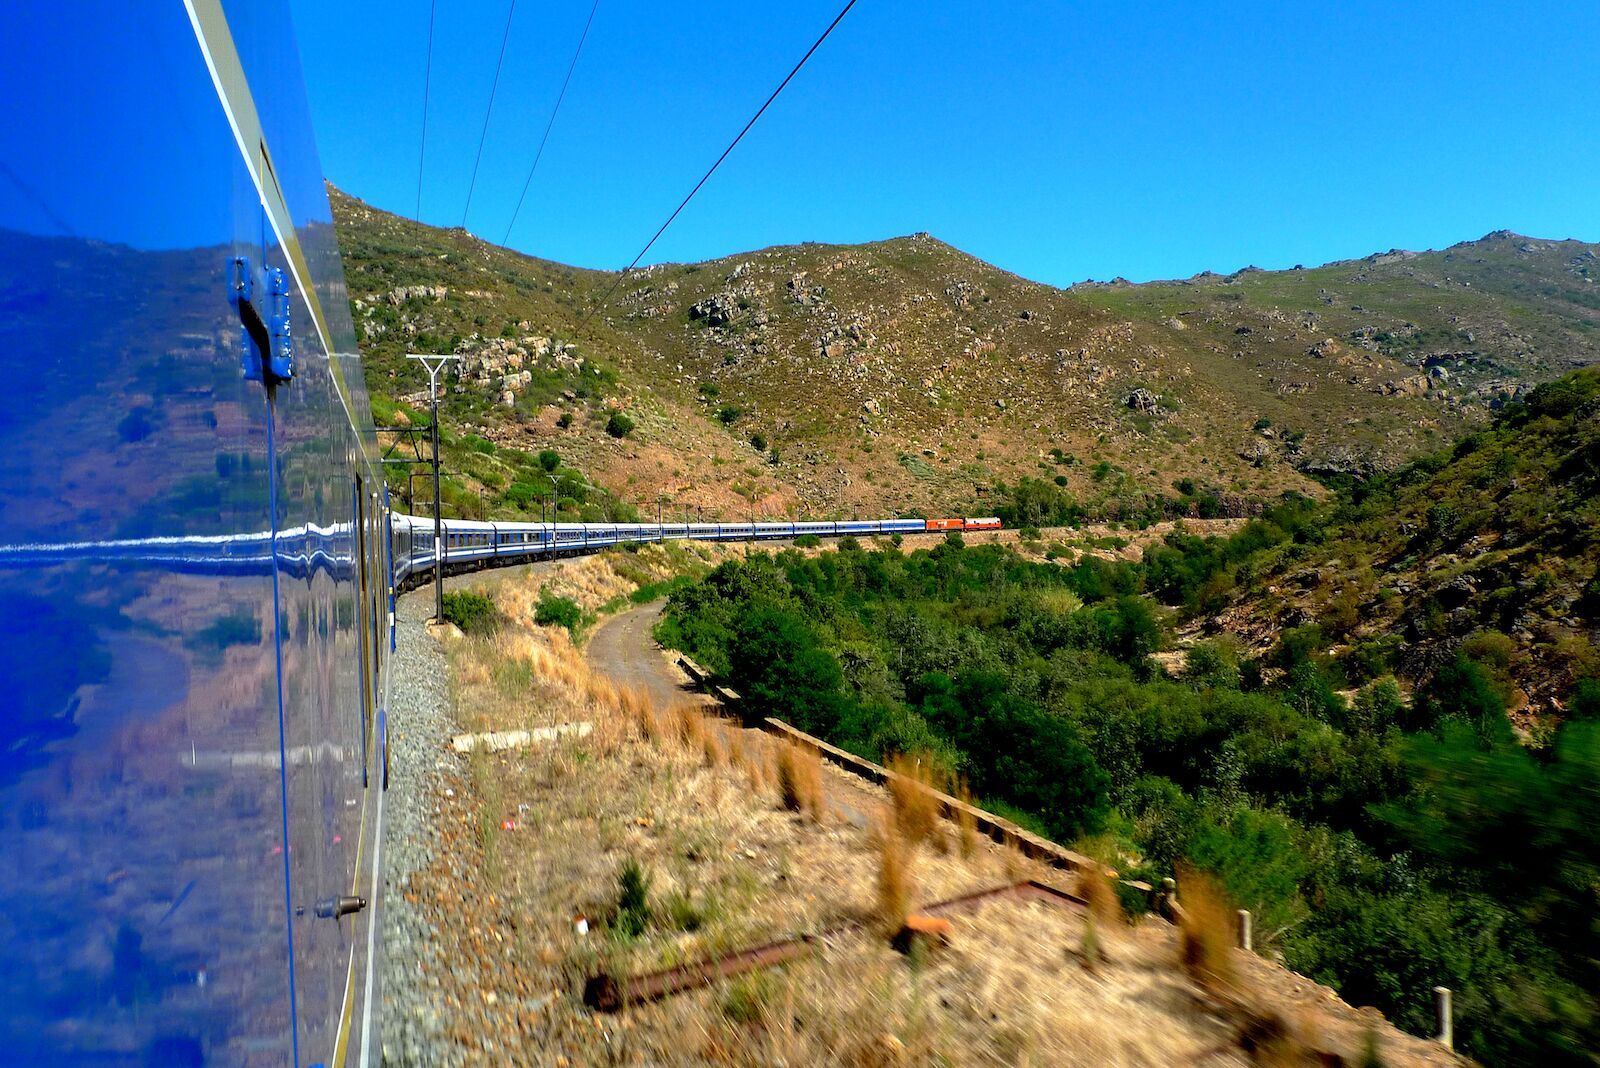 View of the Blue Train in South Africa